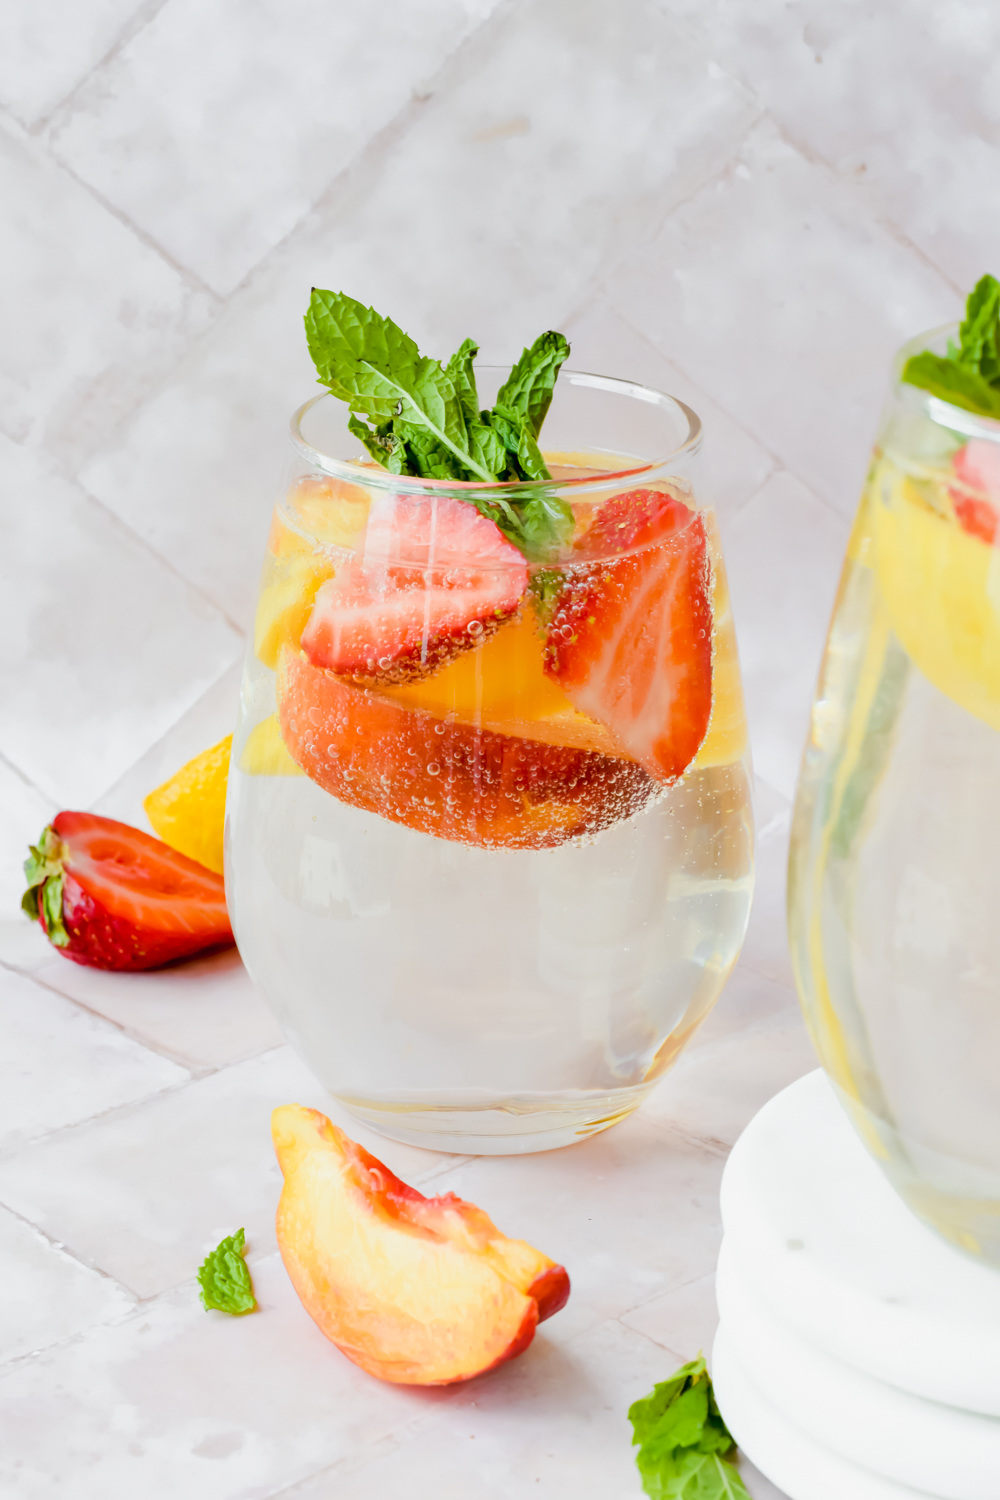 wine glass filled with sparkling white wine peach sangria garnished with fresh mint and berries.